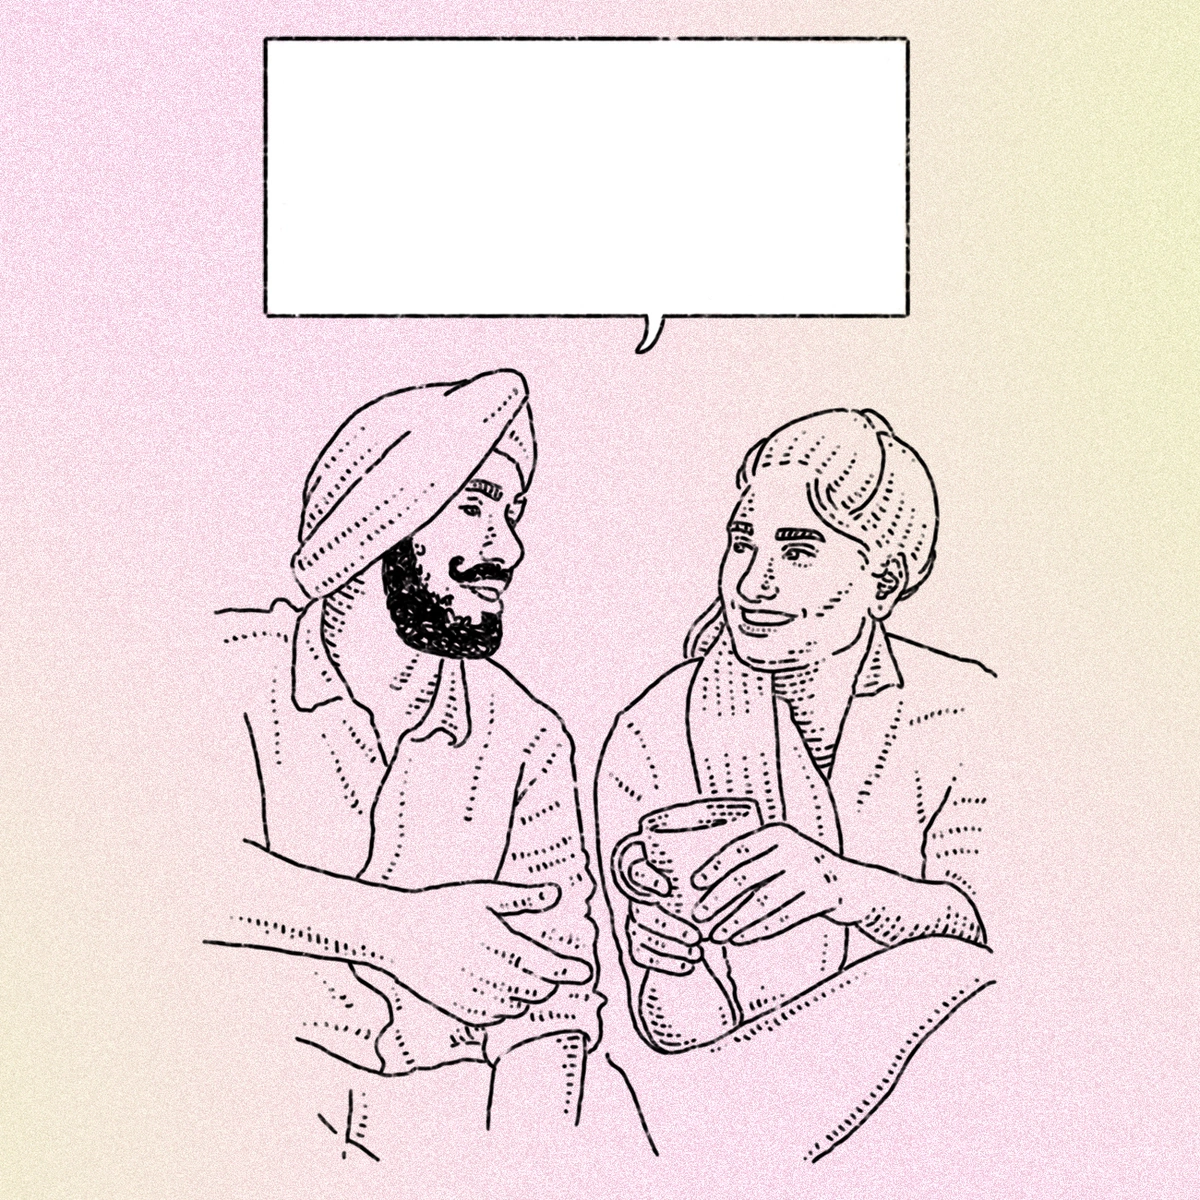 One person talking to another with a speech bubble coming from the person on the left.